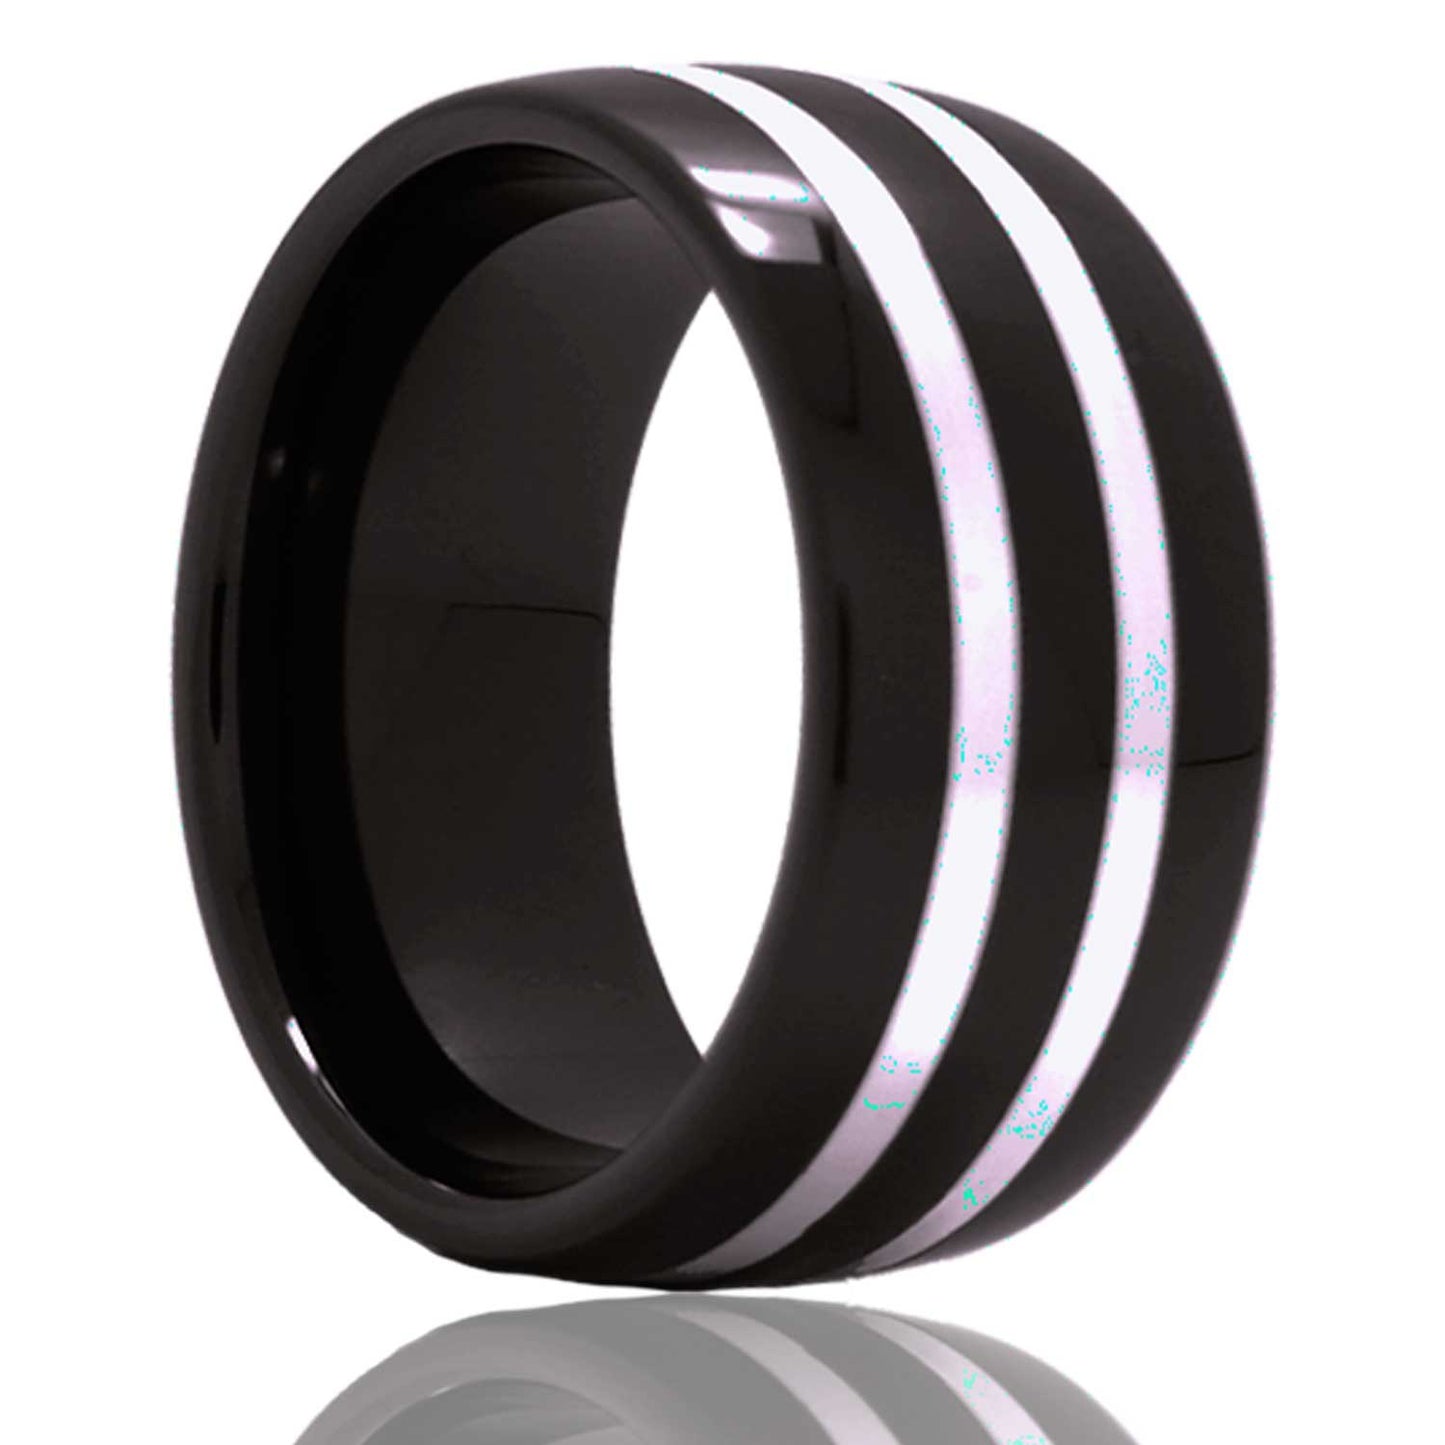 A dual argentium silver inlay domed black ceramic men's wedding band displayed on a neutral white background.